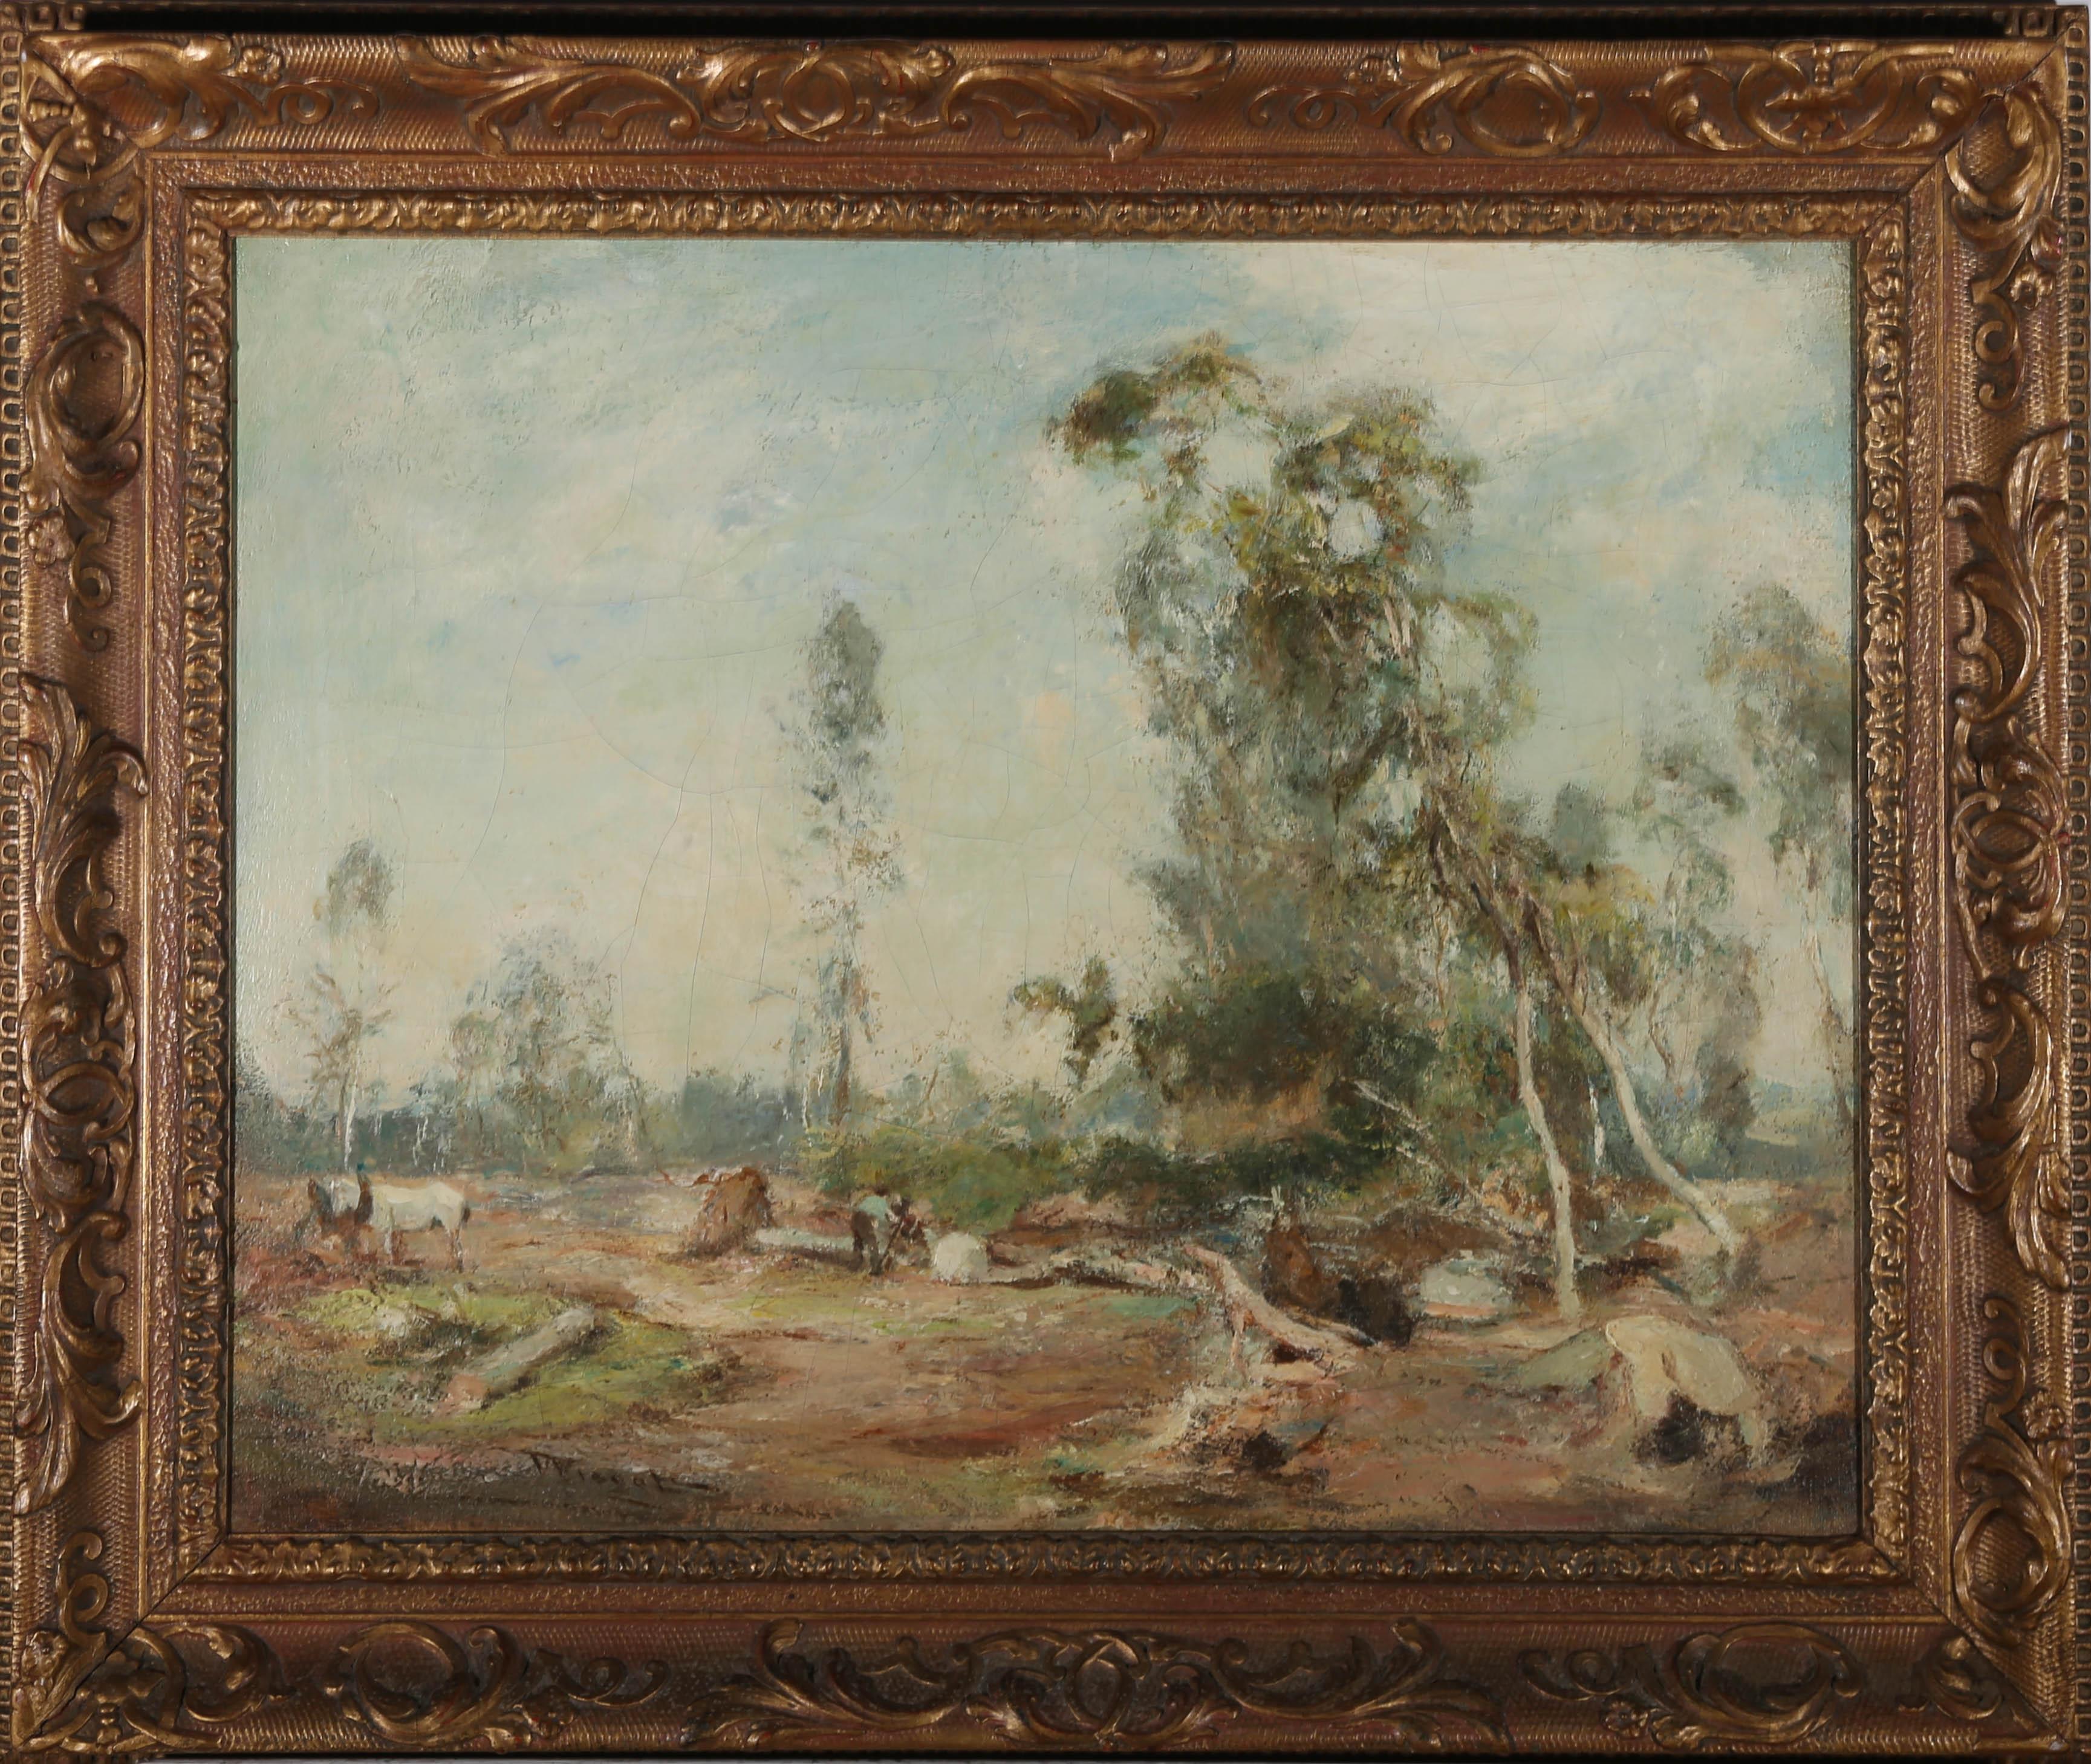 This fine oil study depicts woodcutters hard at work in a forest setting. Painted in the artist's signature impressionist style capturing the idyllic British countryside. Using a muted colour palette, Wingate gives the scene a soft haze, creating a